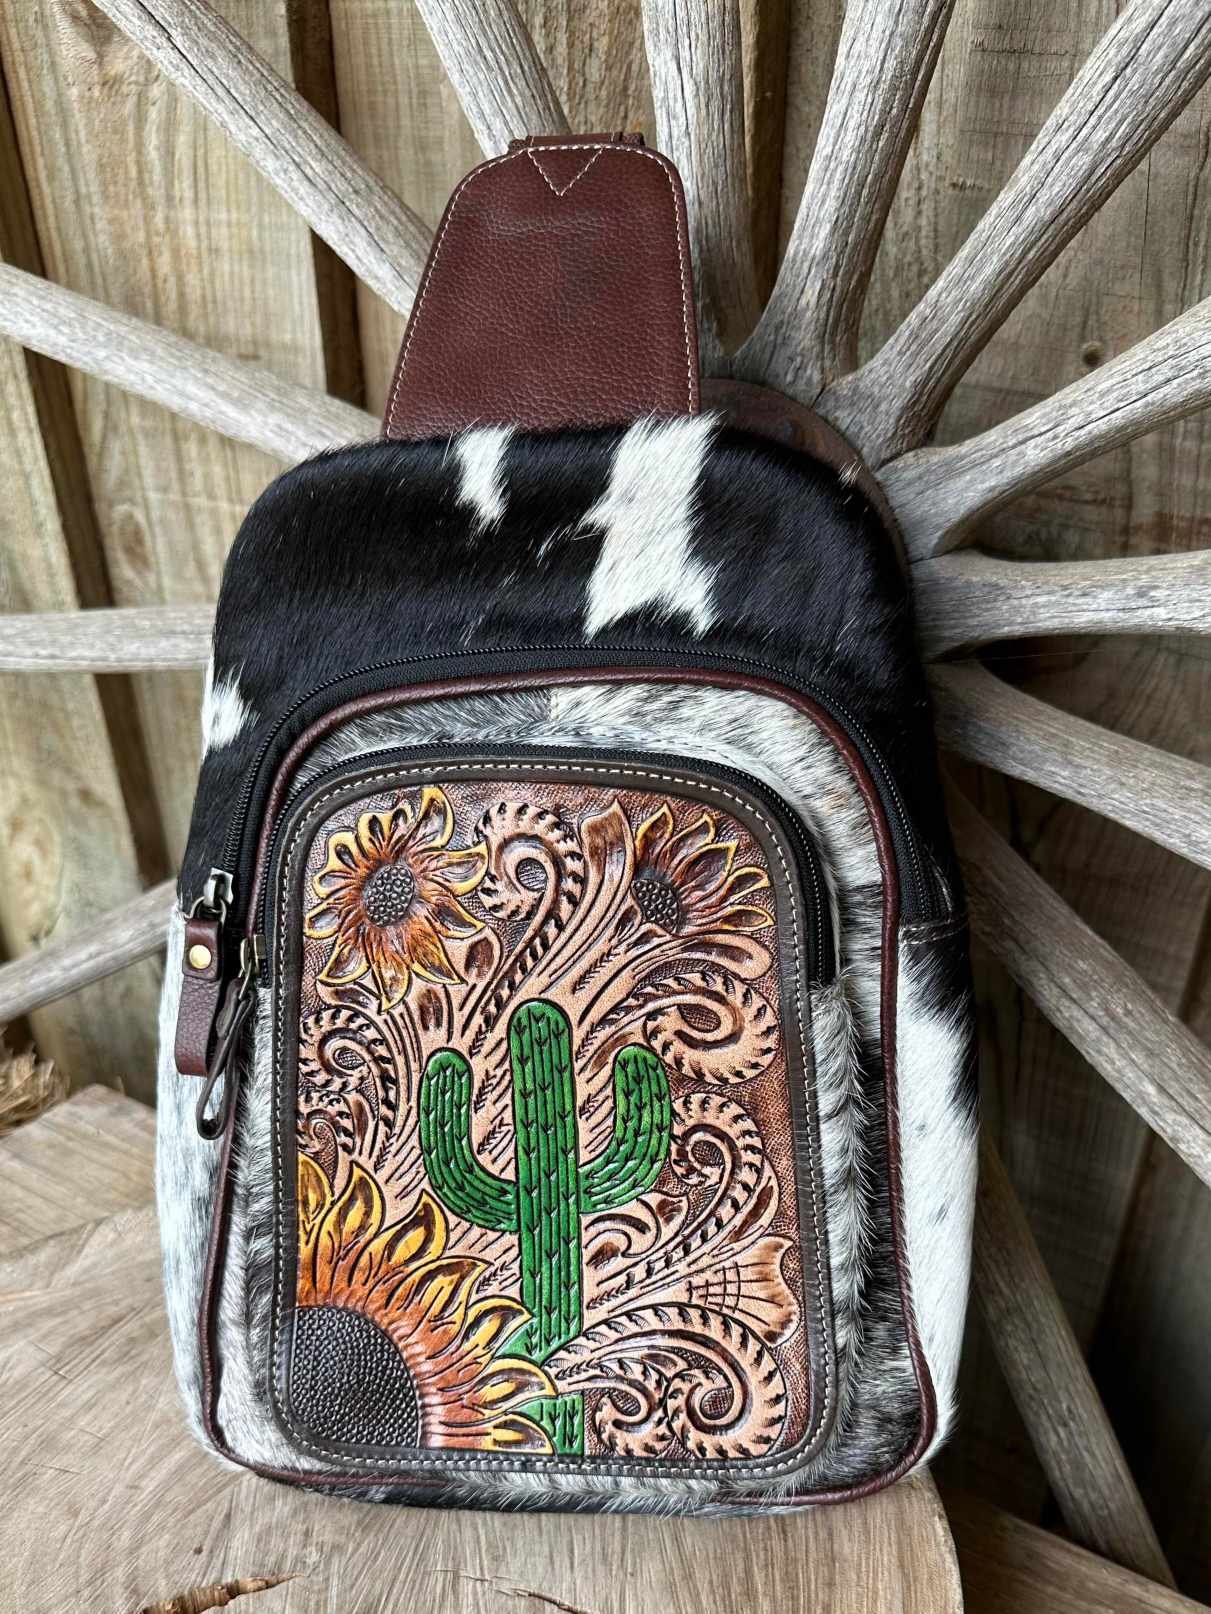 Backpack -  Hair on Hide and Leather Cactus Sling Bag